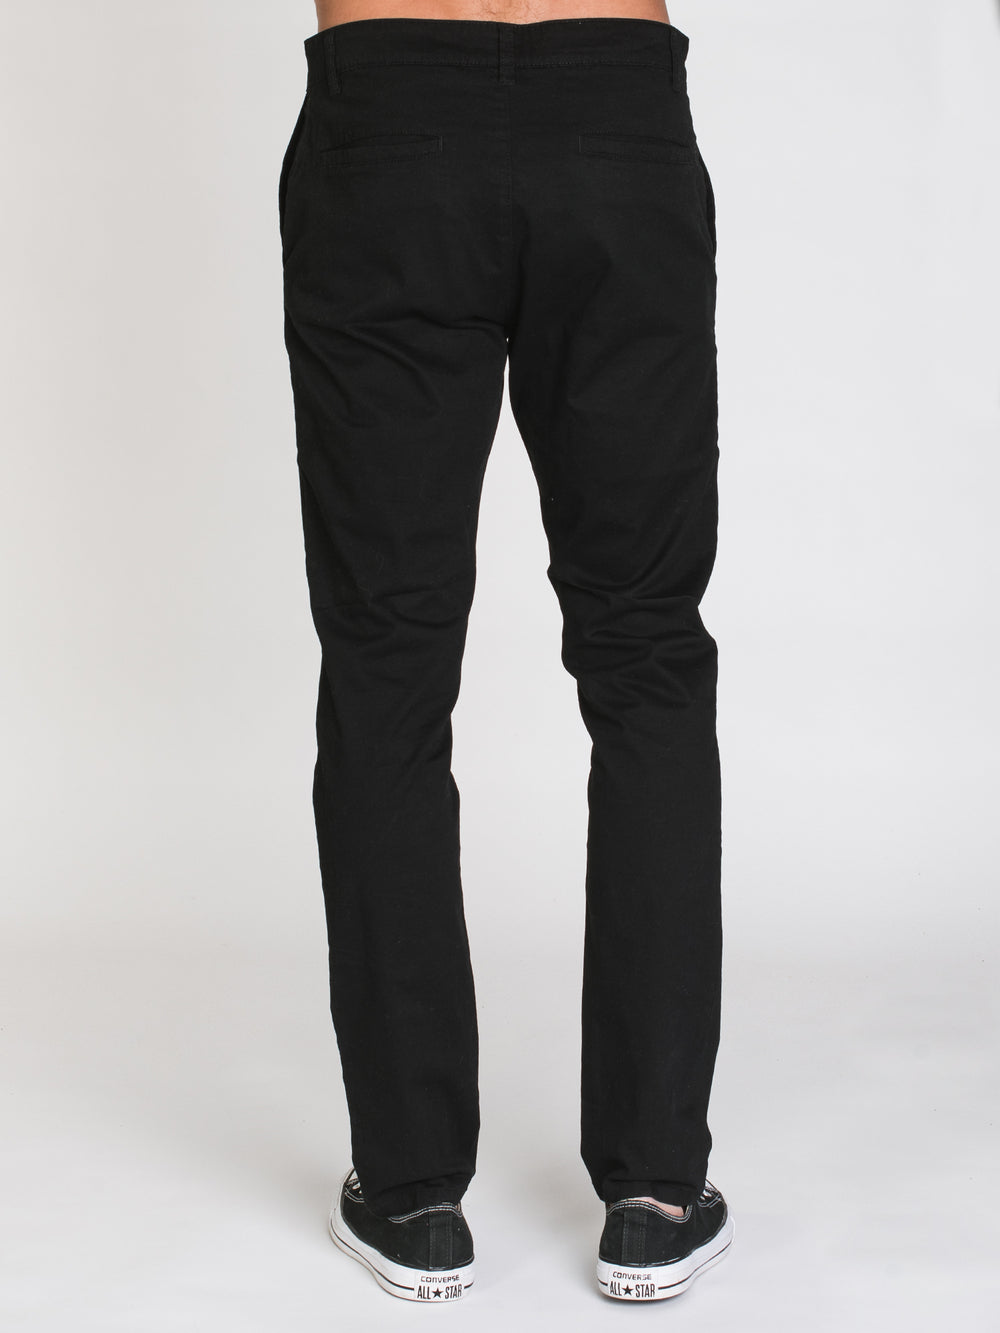 TAINTED SLIM CHINO - BLACK - CLEARANCE